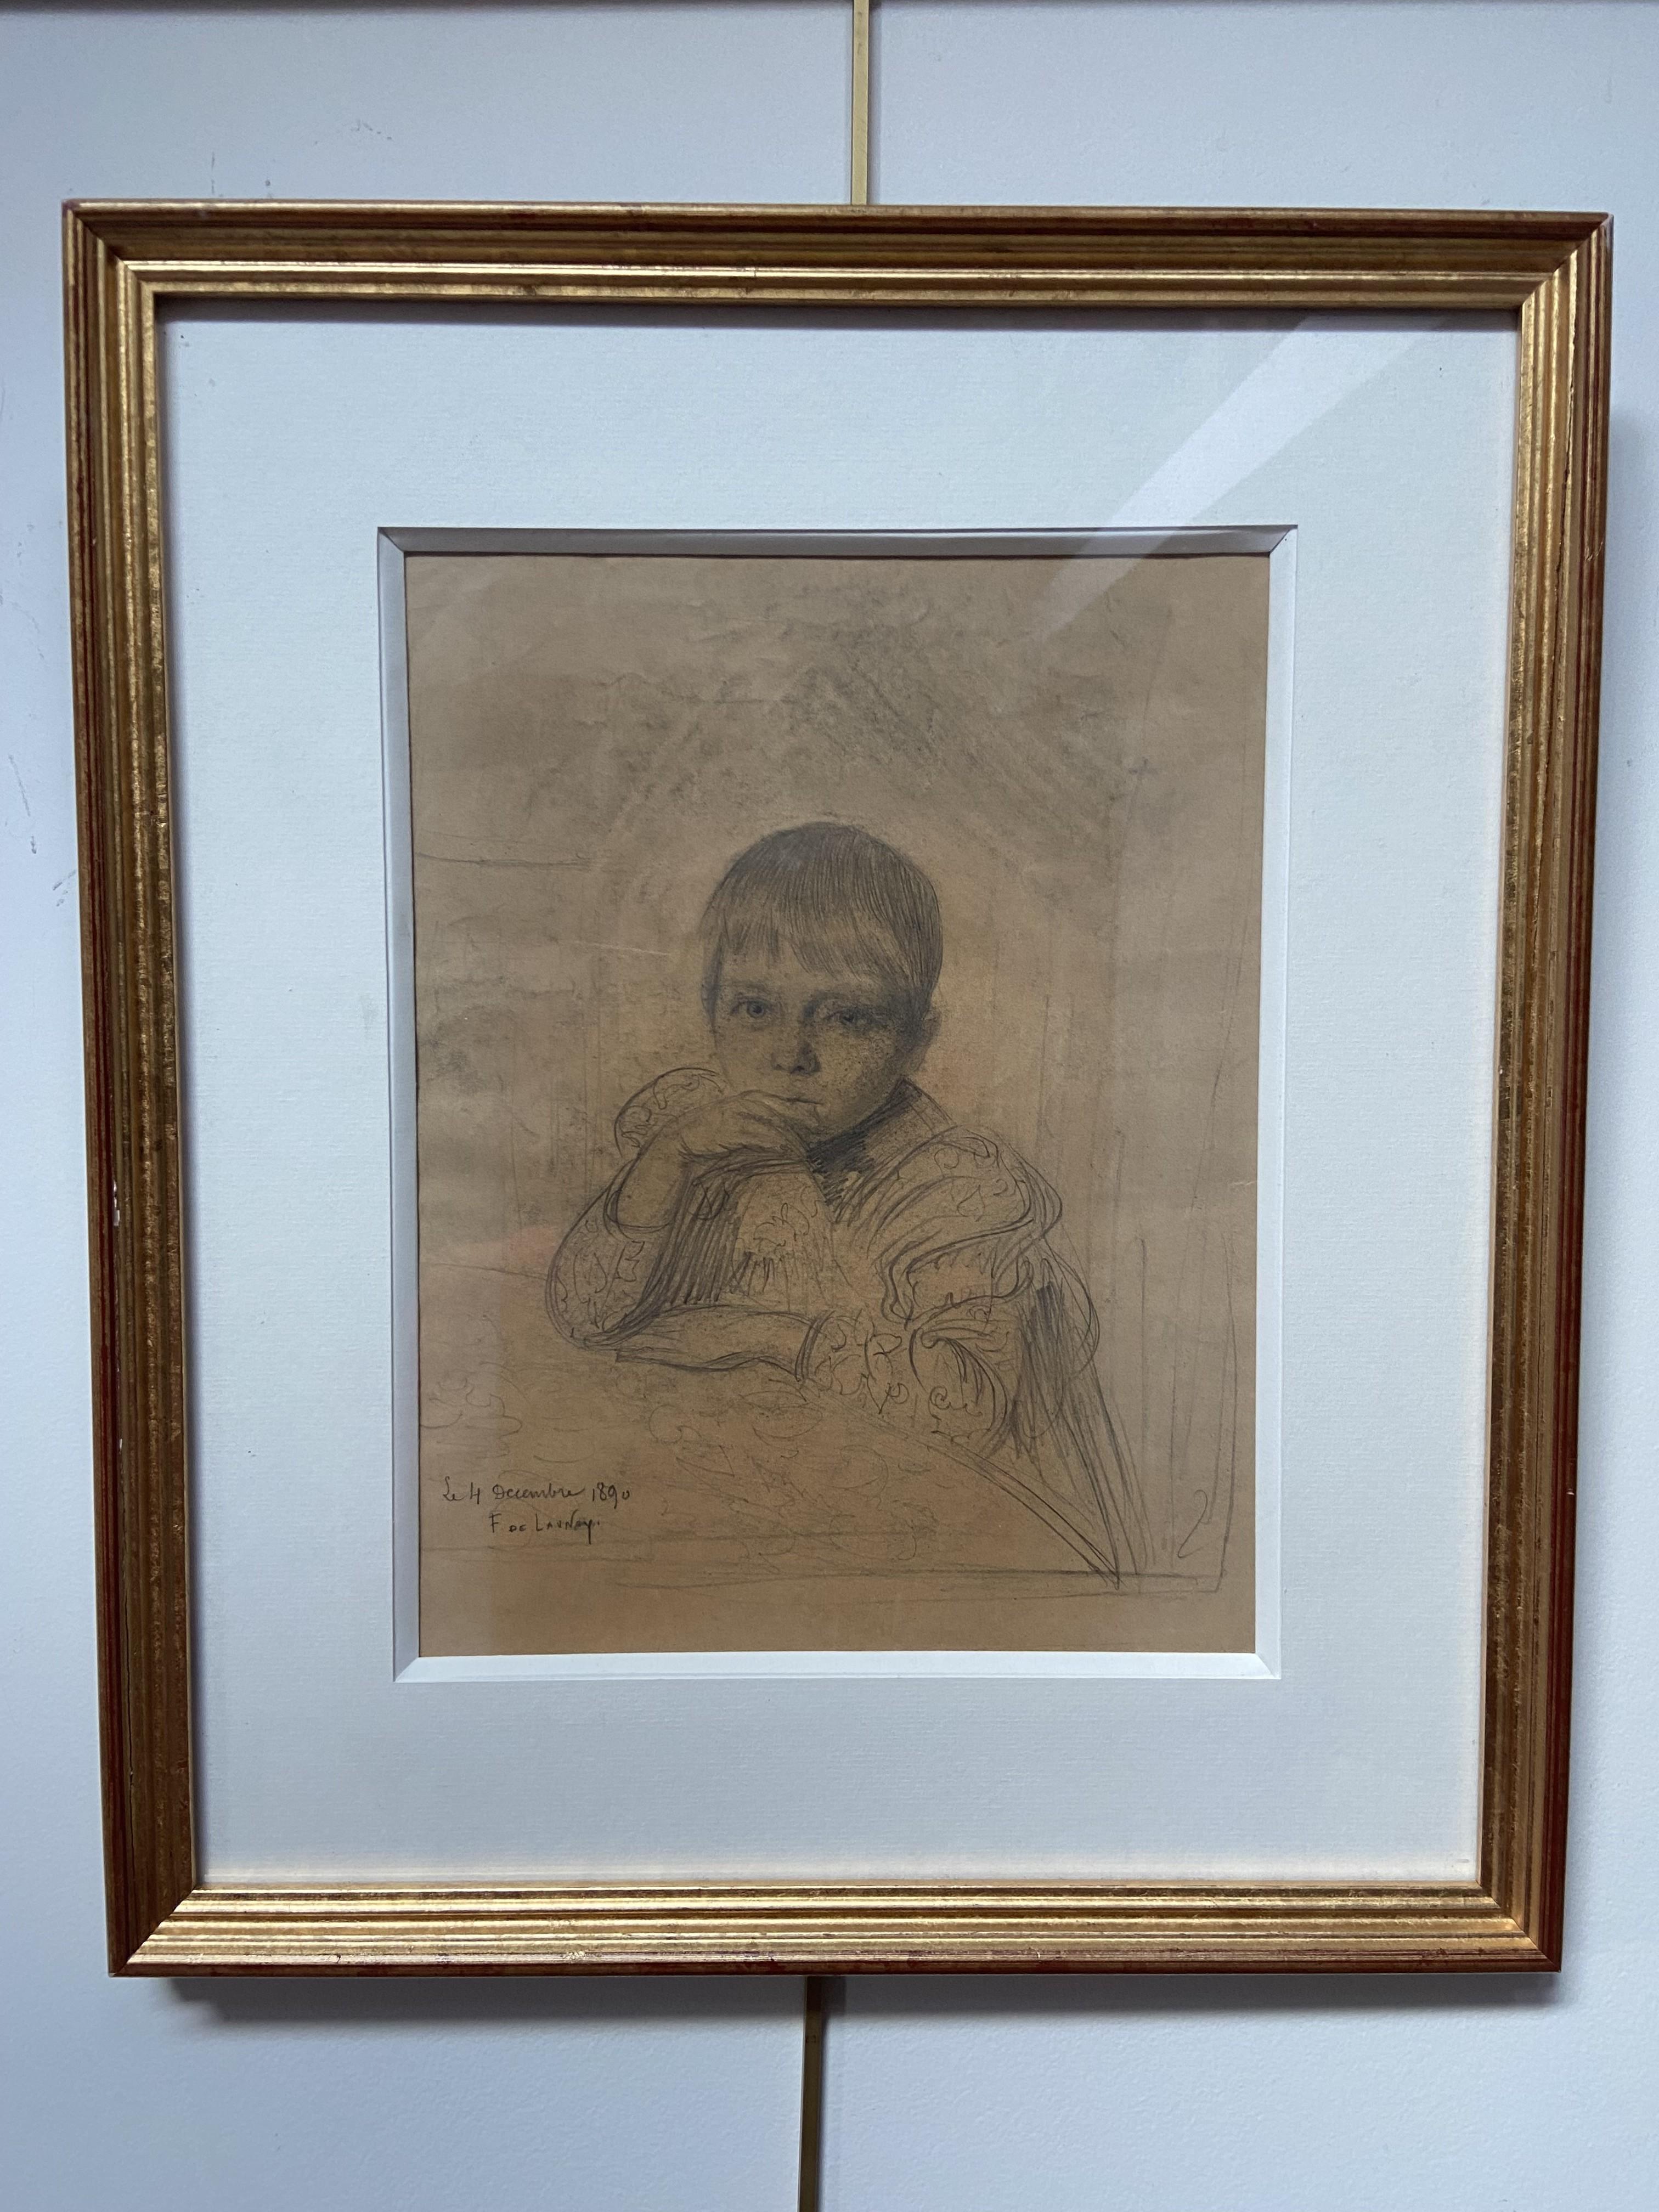 Fernand de Launay (1838-1904)
Portrait of a child, probably the daughter of the artist
Lead pencil on paper
Signed and dated 